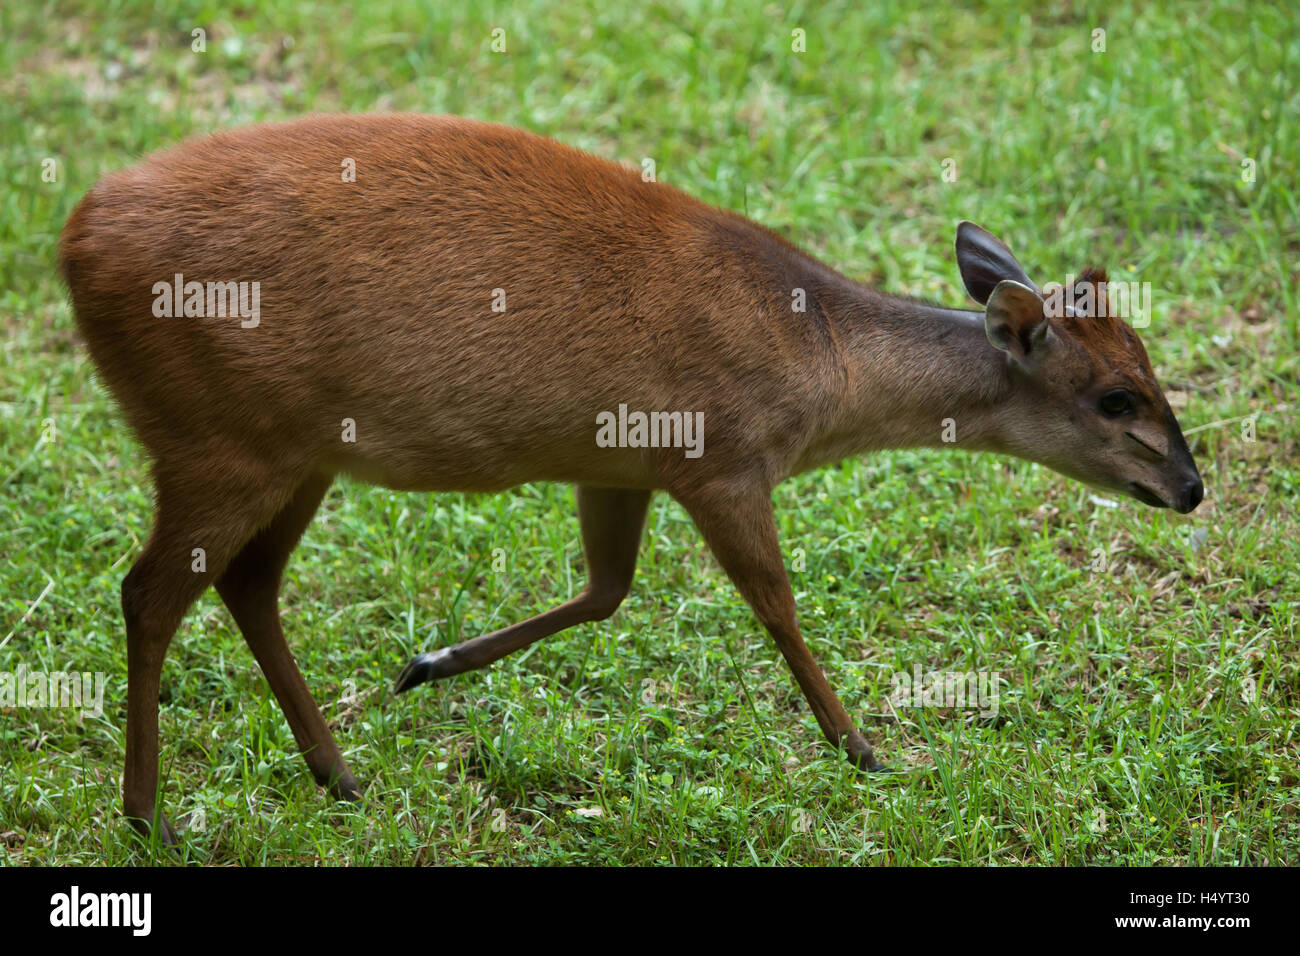 Red forest duiker (Cephalophus natalensis), also known as the Natal duiker. Wildlife animal. Stock Photo